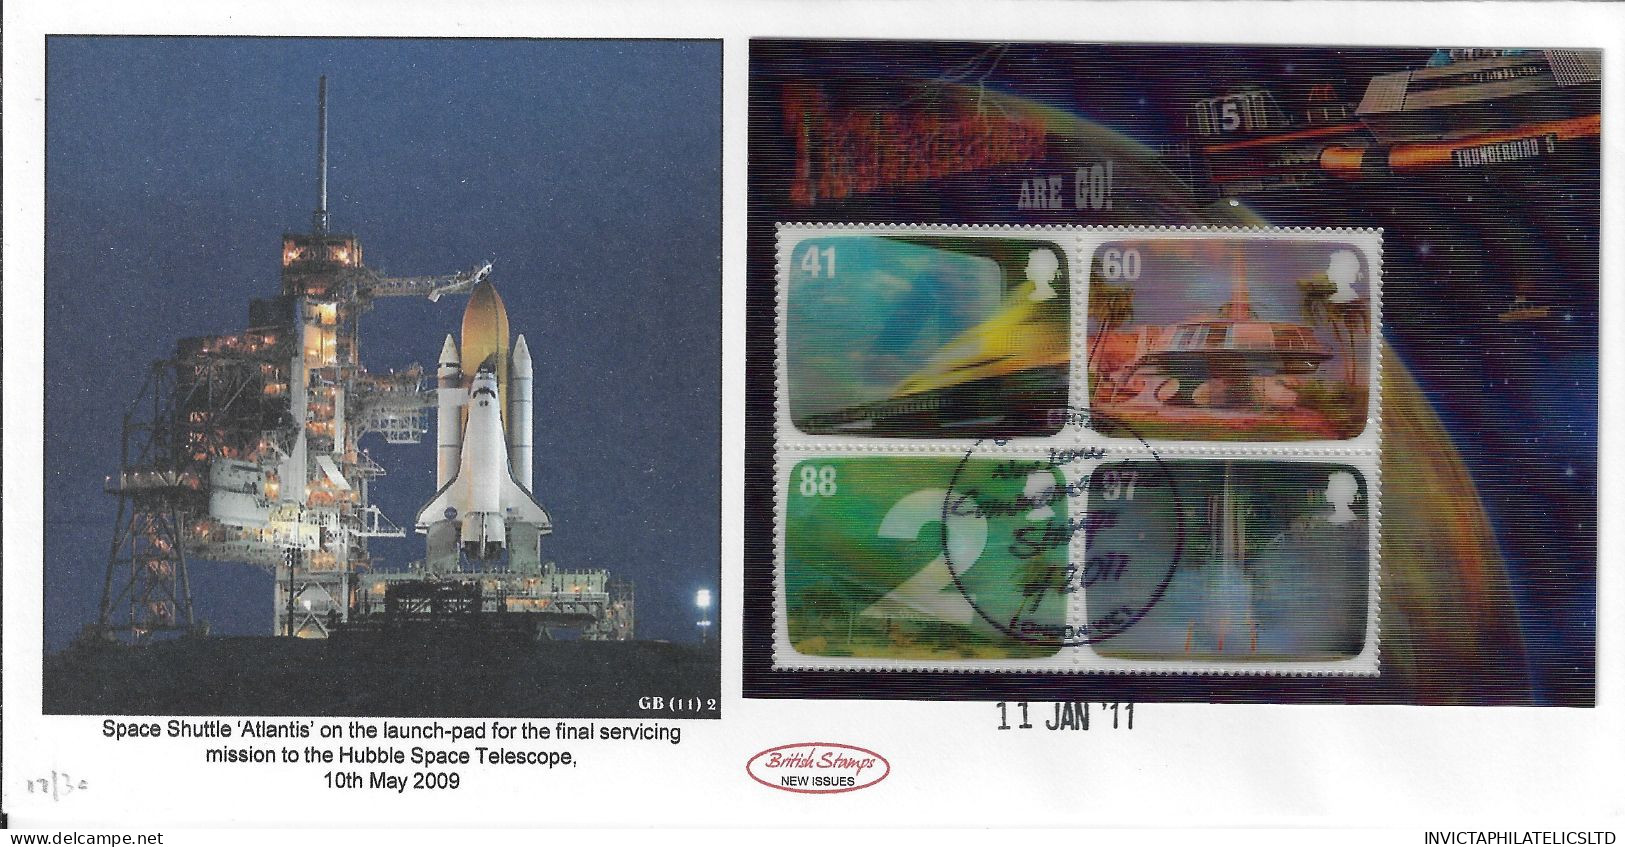 GB 2011 THUNDERBIRDS MINI SHEET, CAMBRIDGE STAMP CENTRE OFFICIAL FDC, 30 PRODUCED ONLY - 2011-2020 Decimal Issues